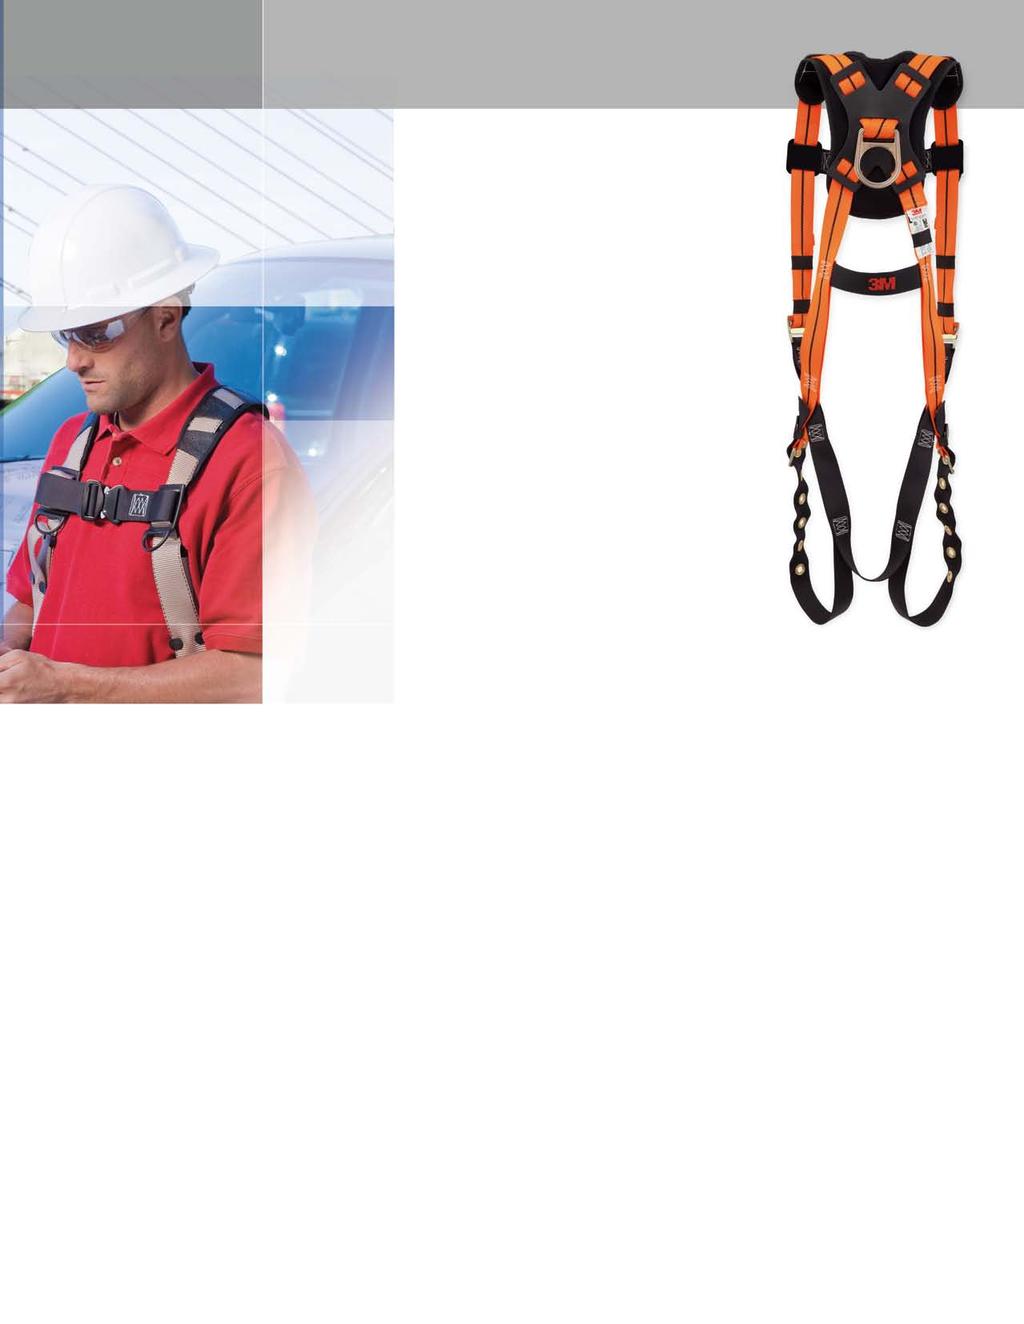 AMEBA [ UPPER MIDRANGE ] The Ameba harness features a special non-elastic helical yarn webbing that is designed to flex with the wearer for non-binding comfort.